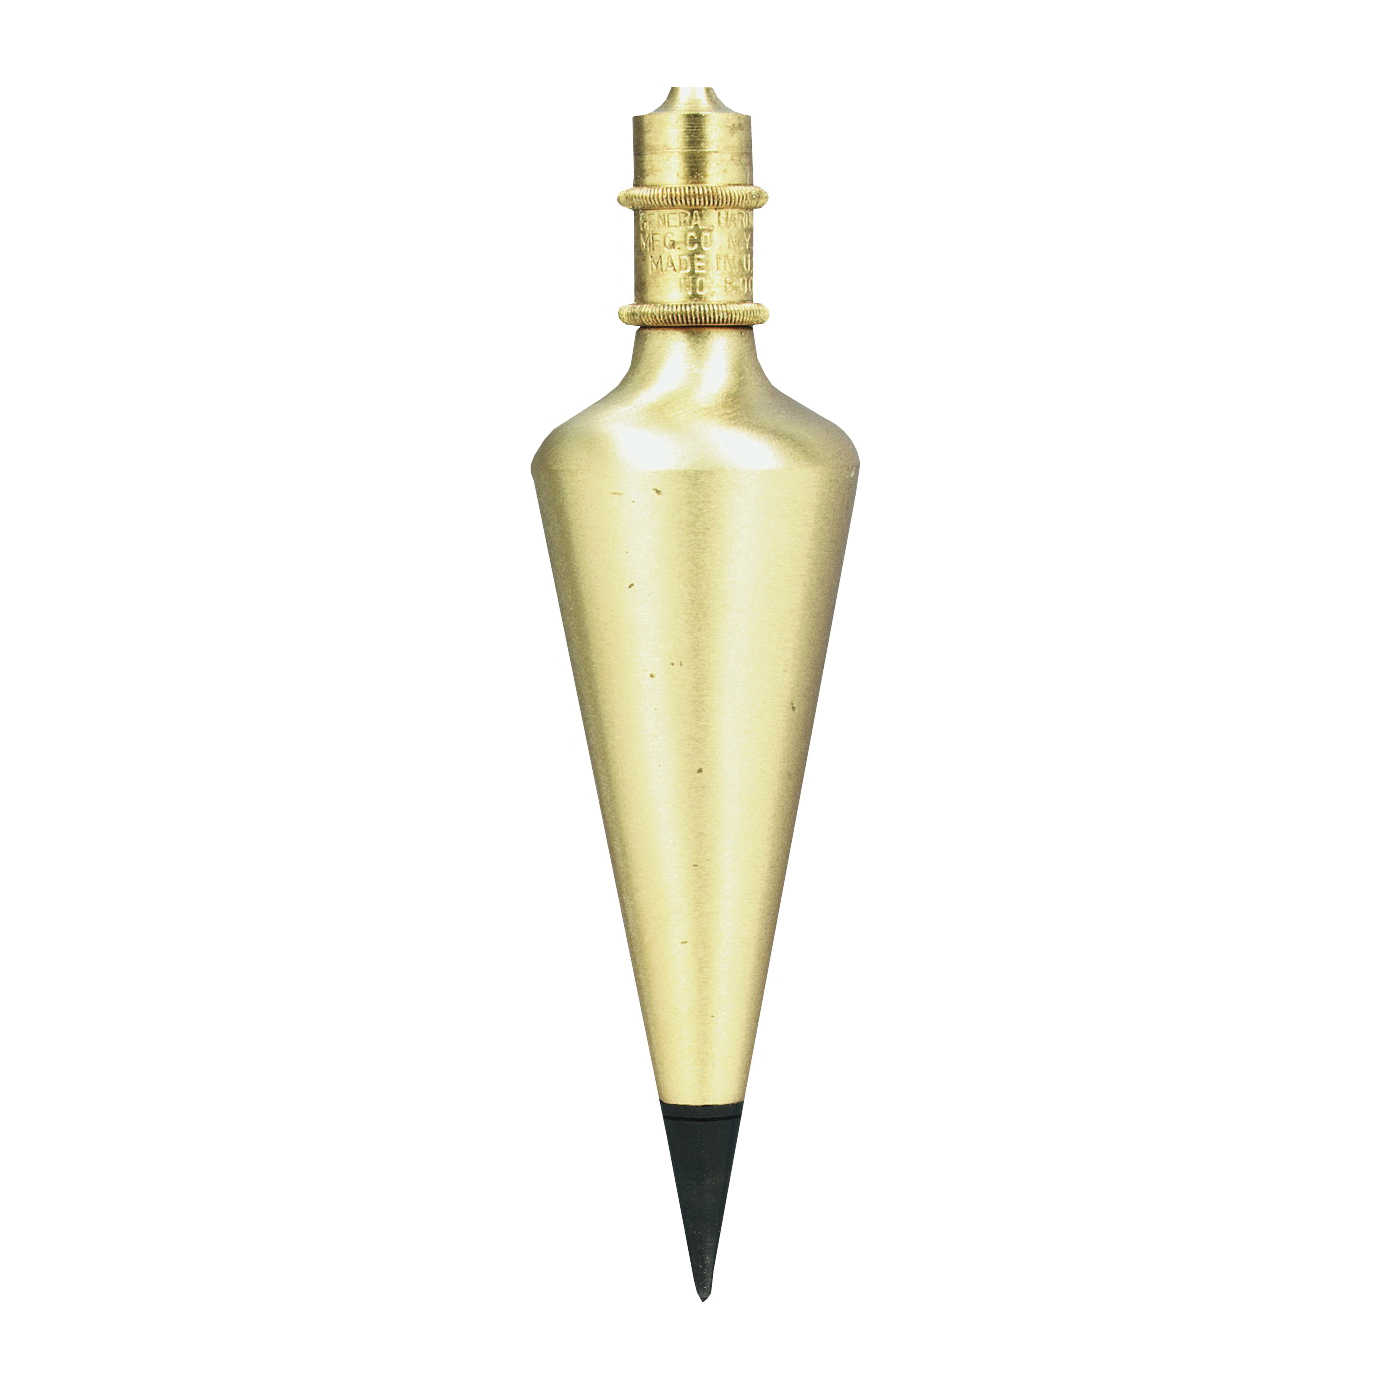 GENERAL 800-12 Plumb Bob, Solid Brass, Lacquered - 1